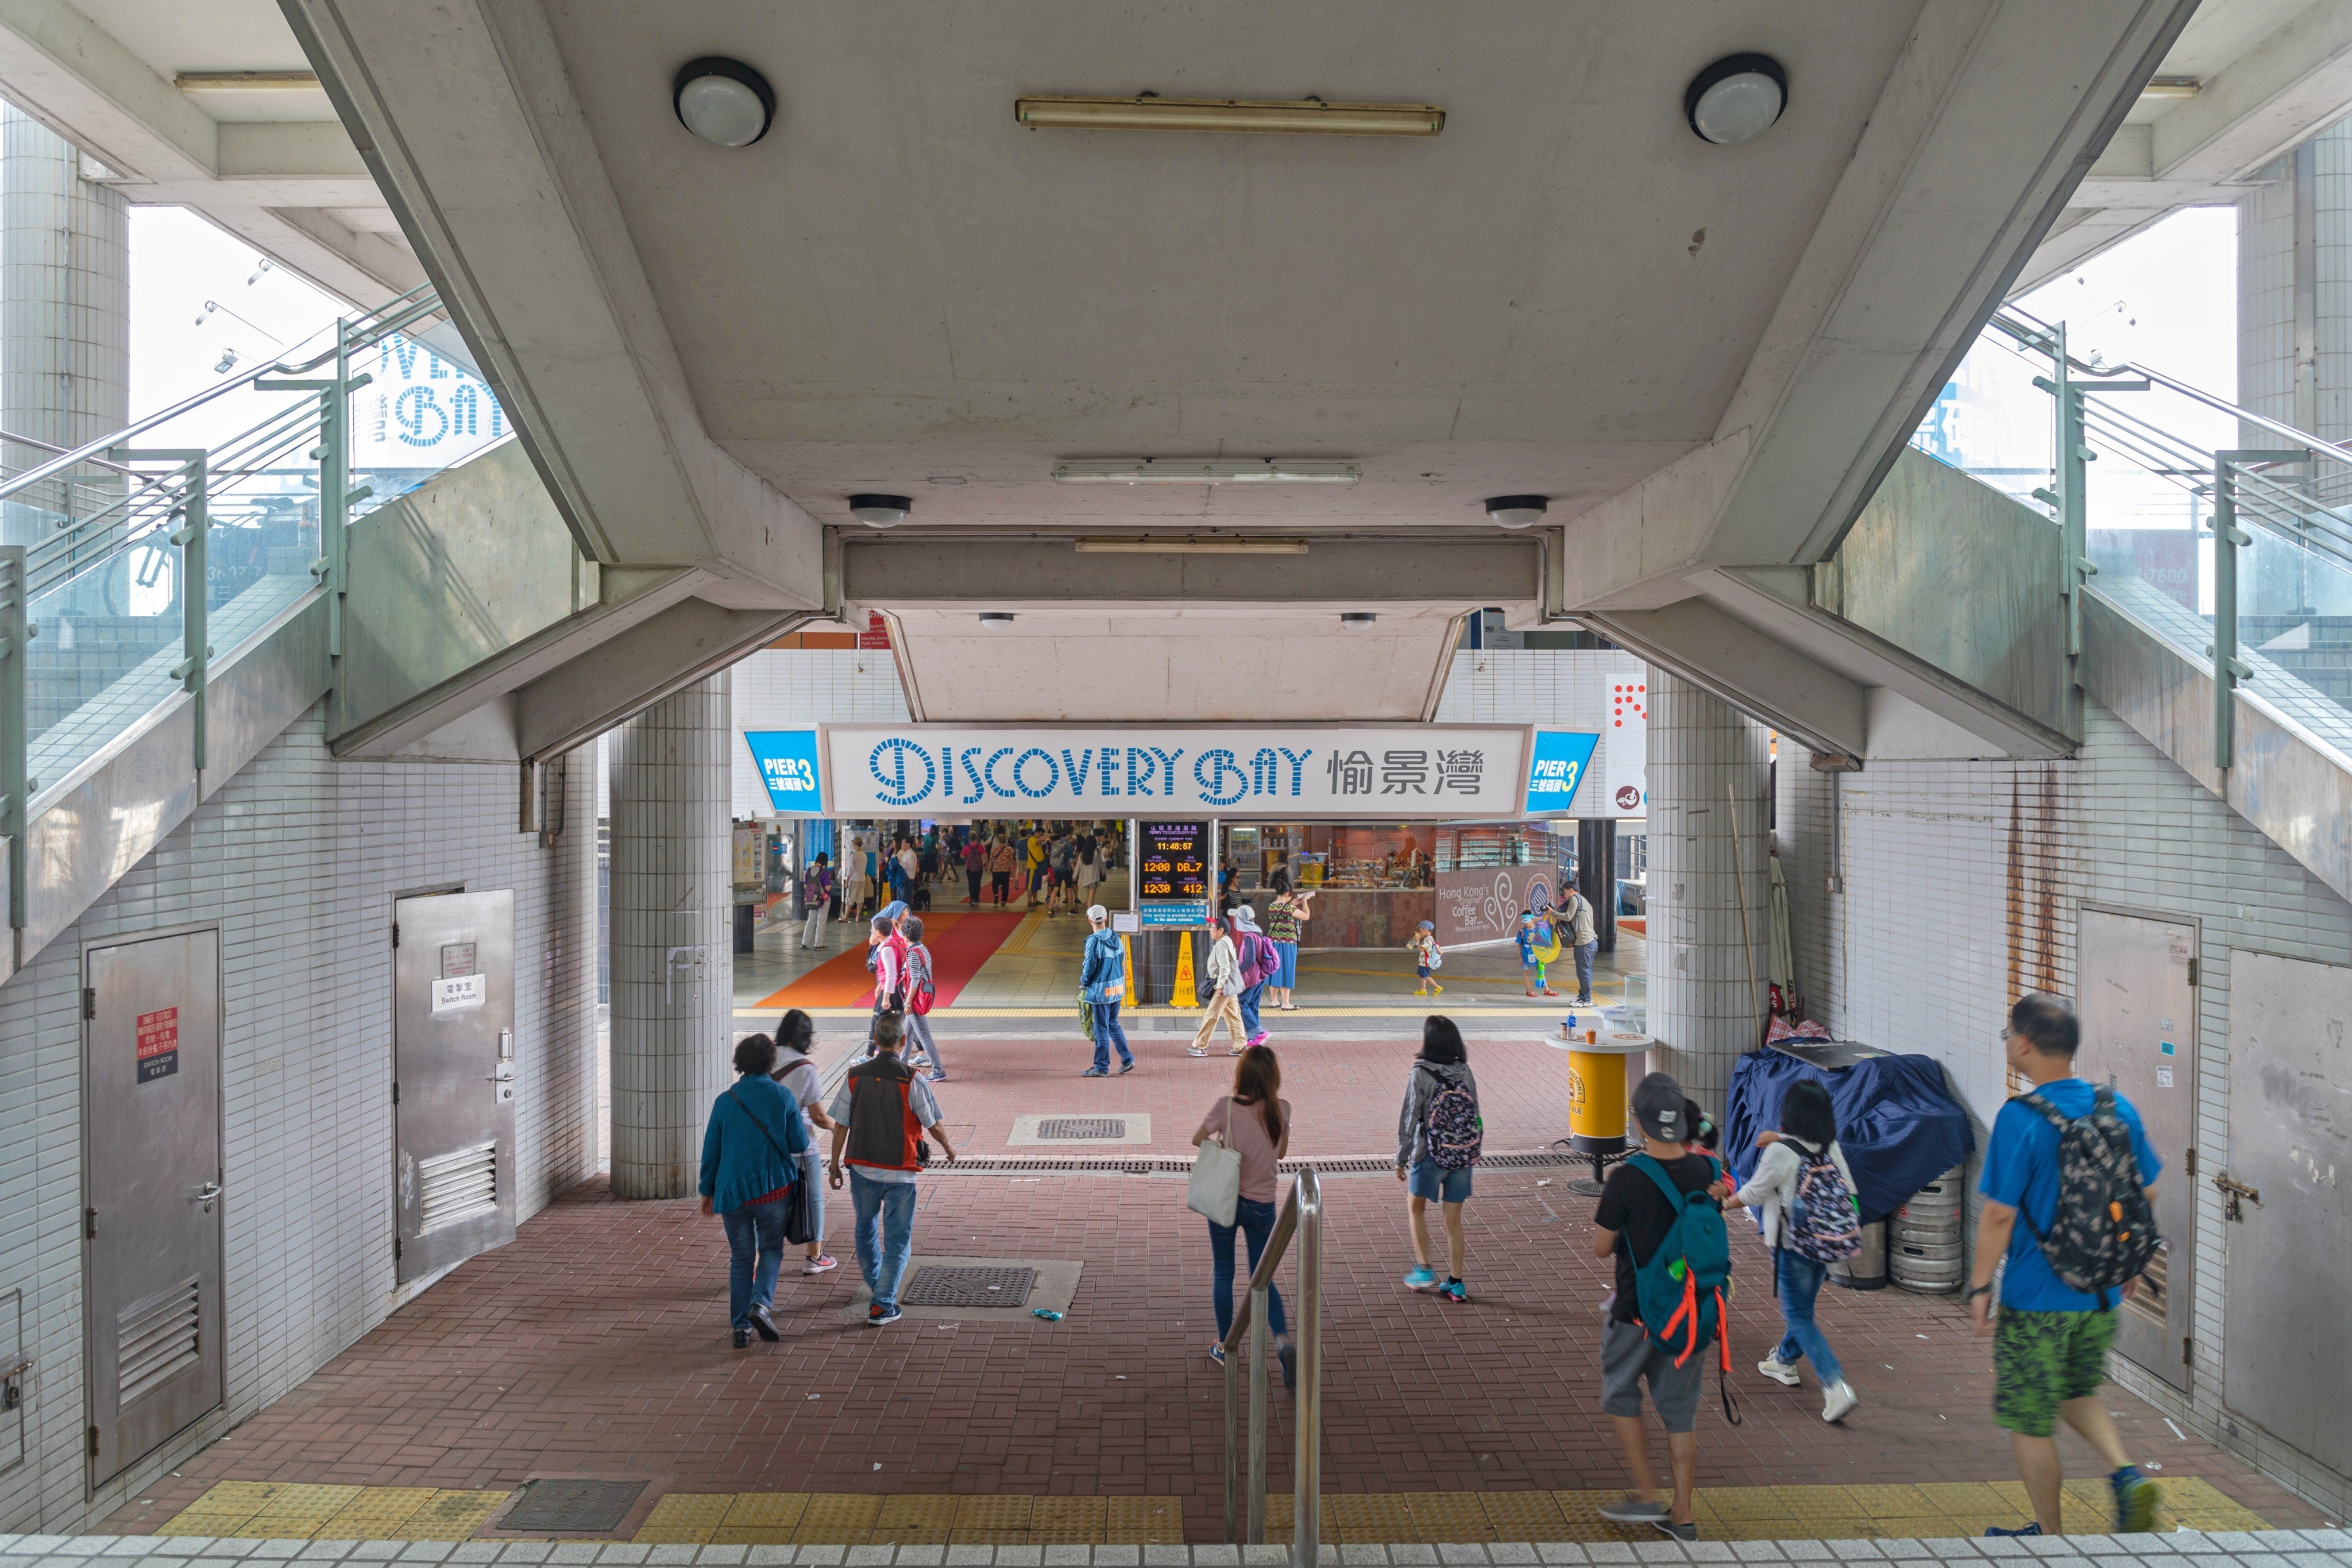 Discovery Bay ferry commuters. Service operator is seeking to raise fare. Photo: Shutterstock